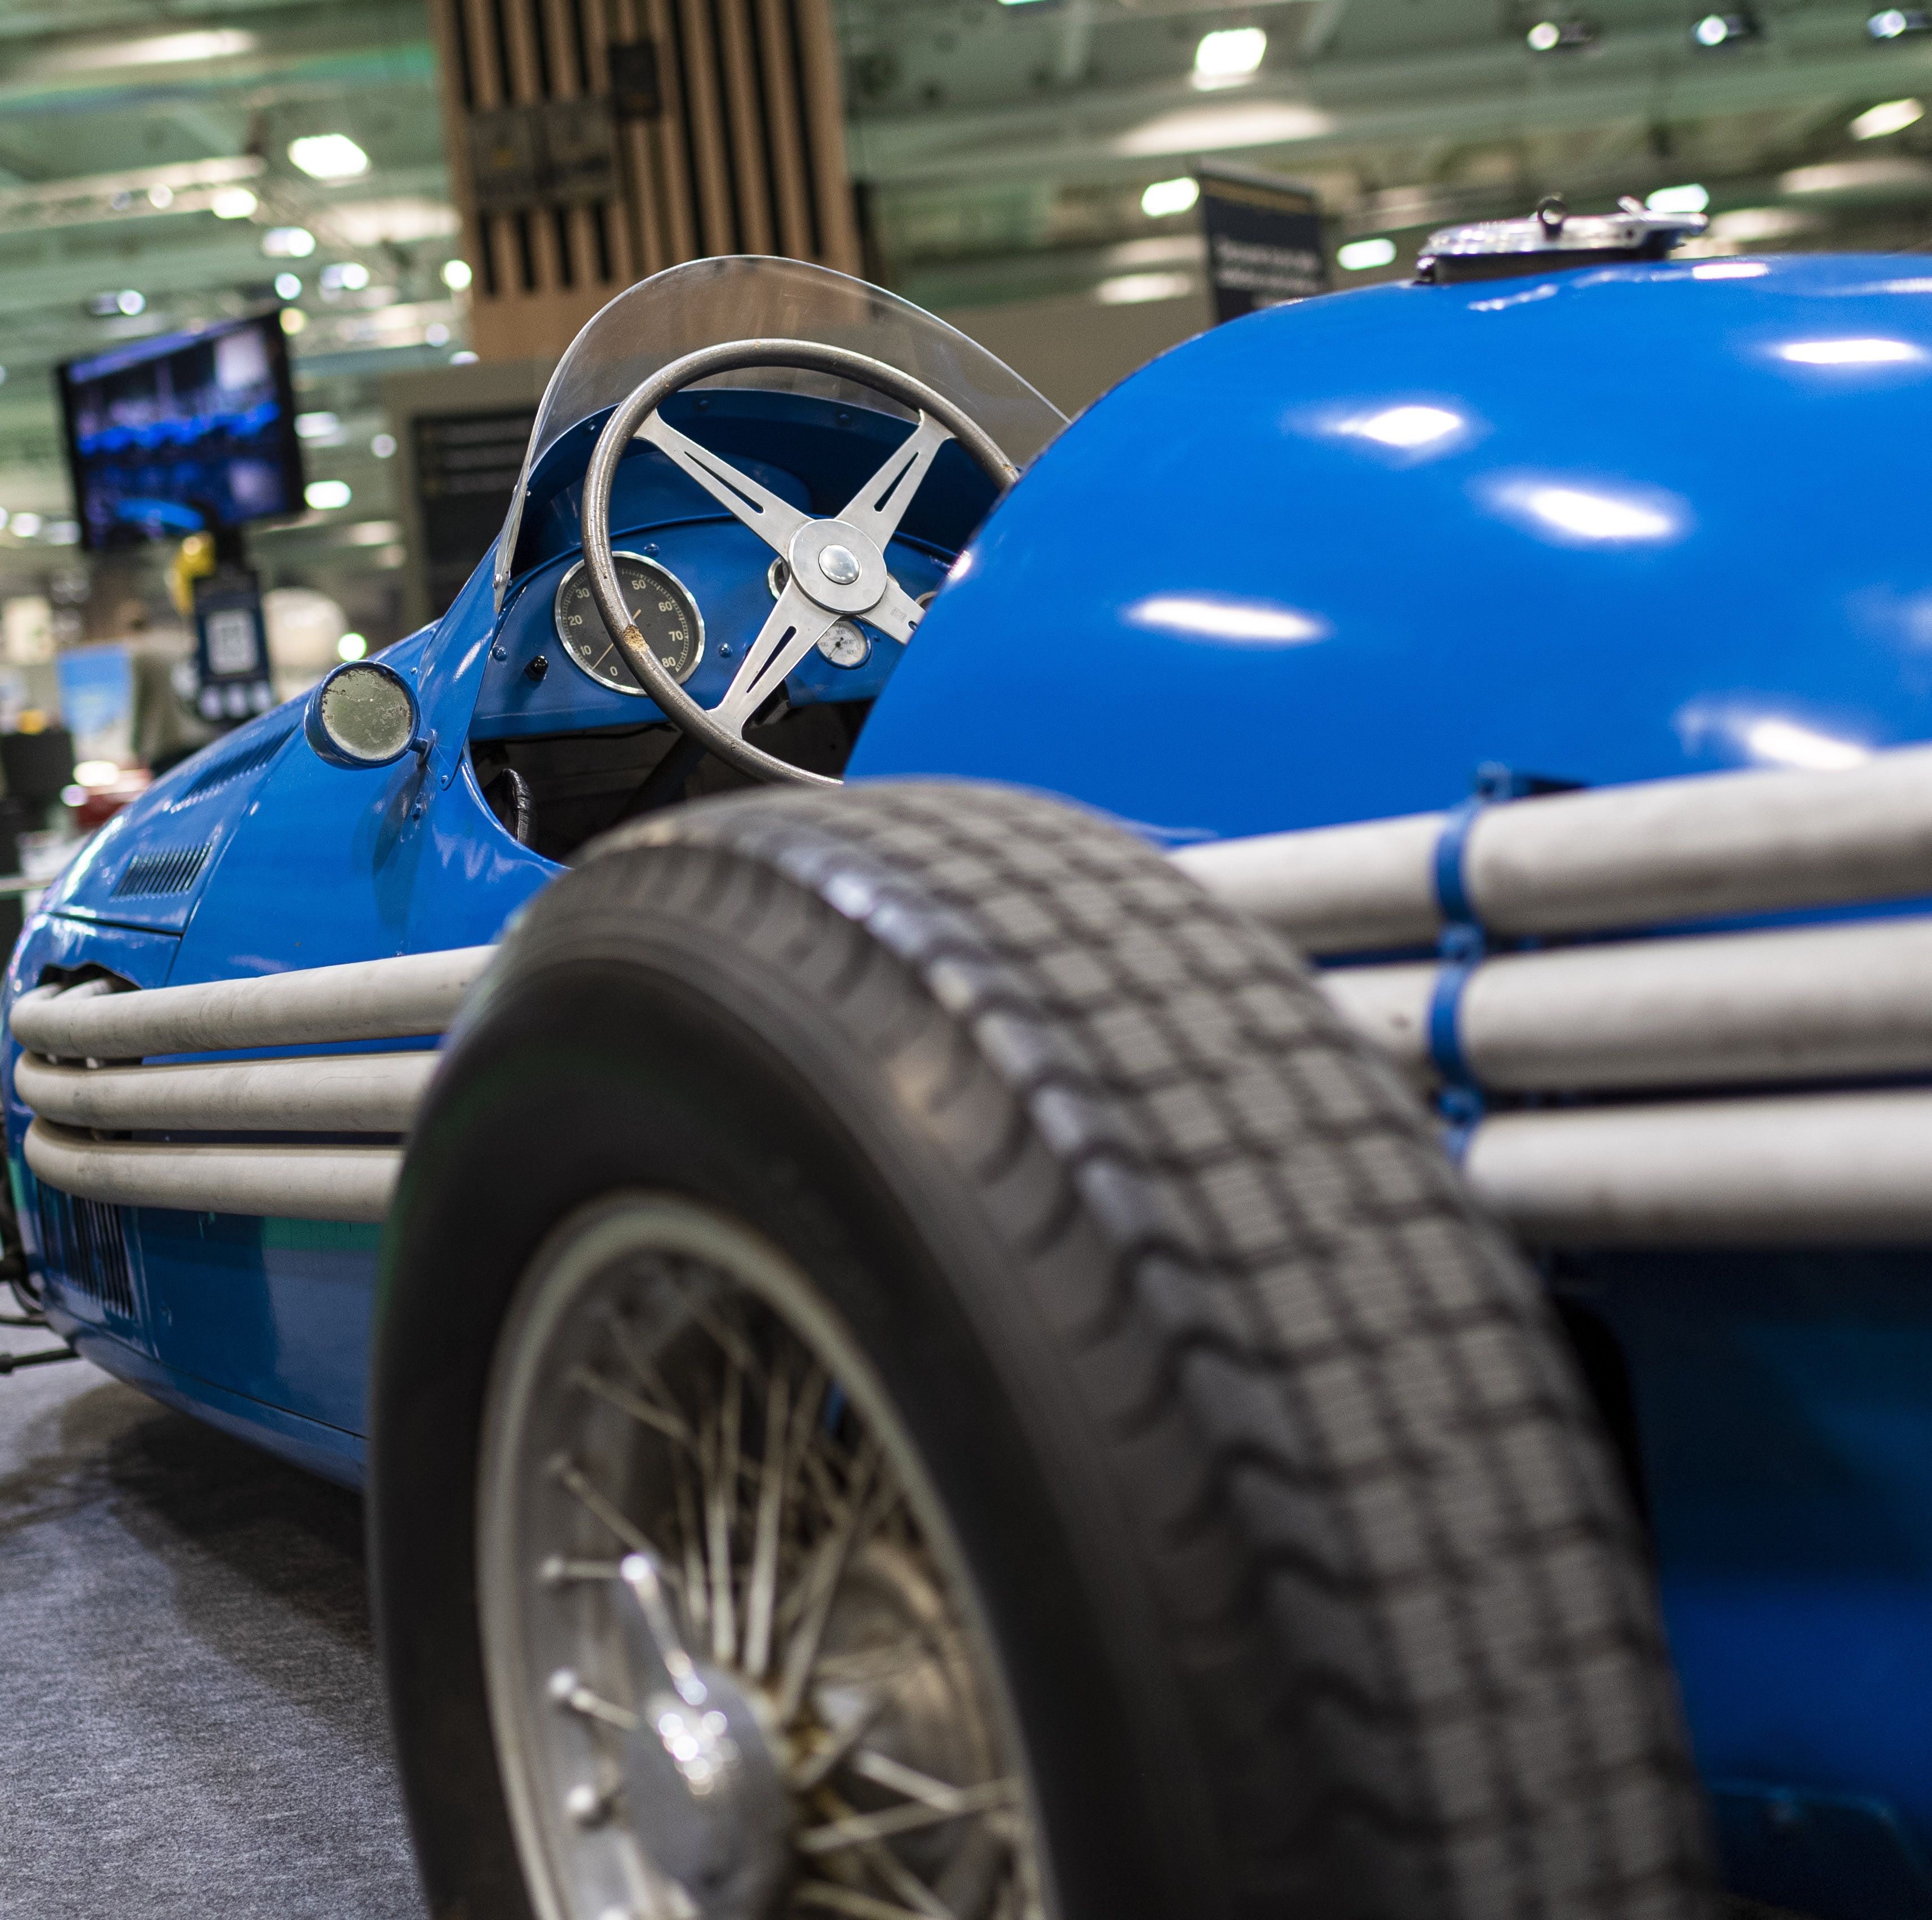 Retromobile, the Great French Classic Car Show, Returned for 2022